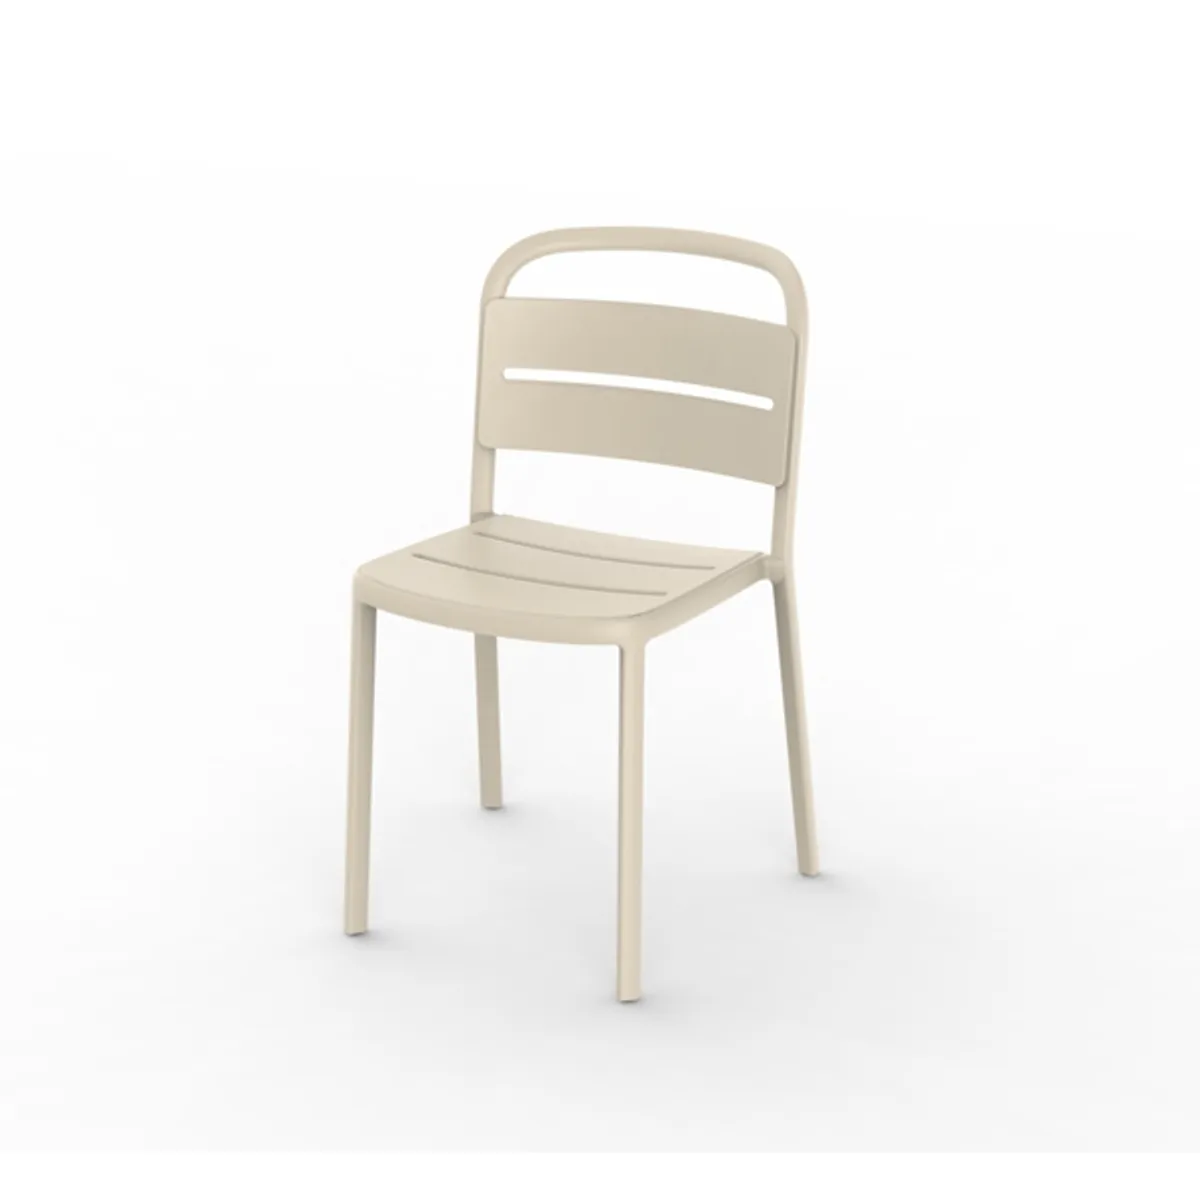 Corasidechair Inside Out Contracts2